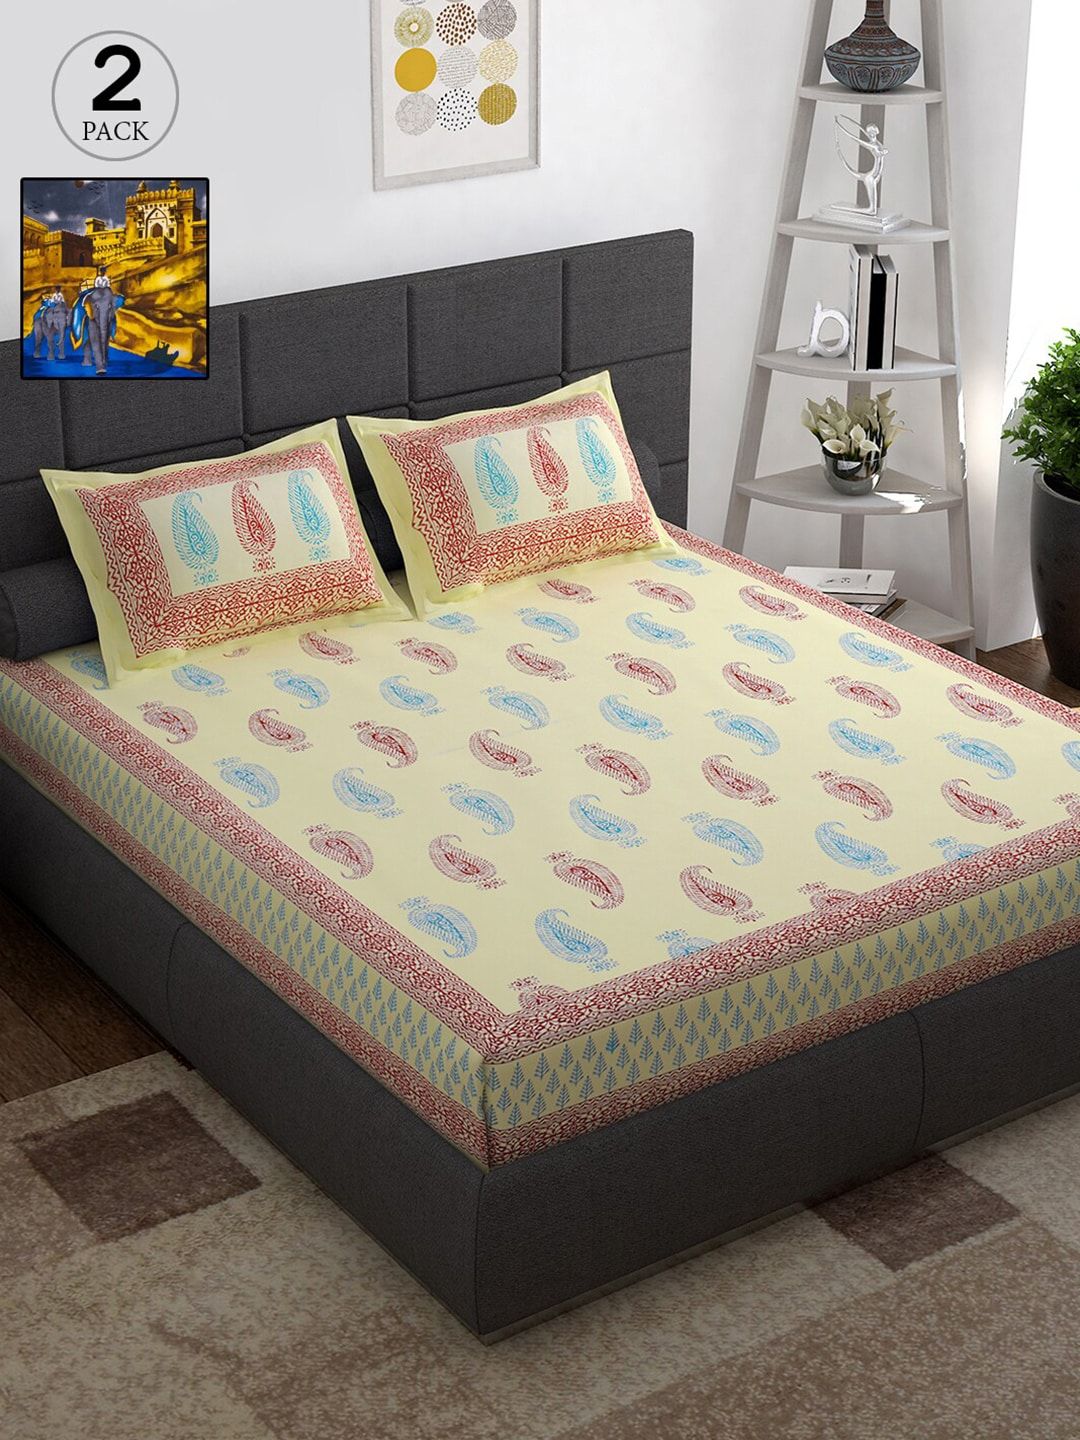 Story@home Pack of 2 Ethnic Motifs 152 TC Cotton 2 Queen Bedsheet with 4 Pillow Covers Price in India